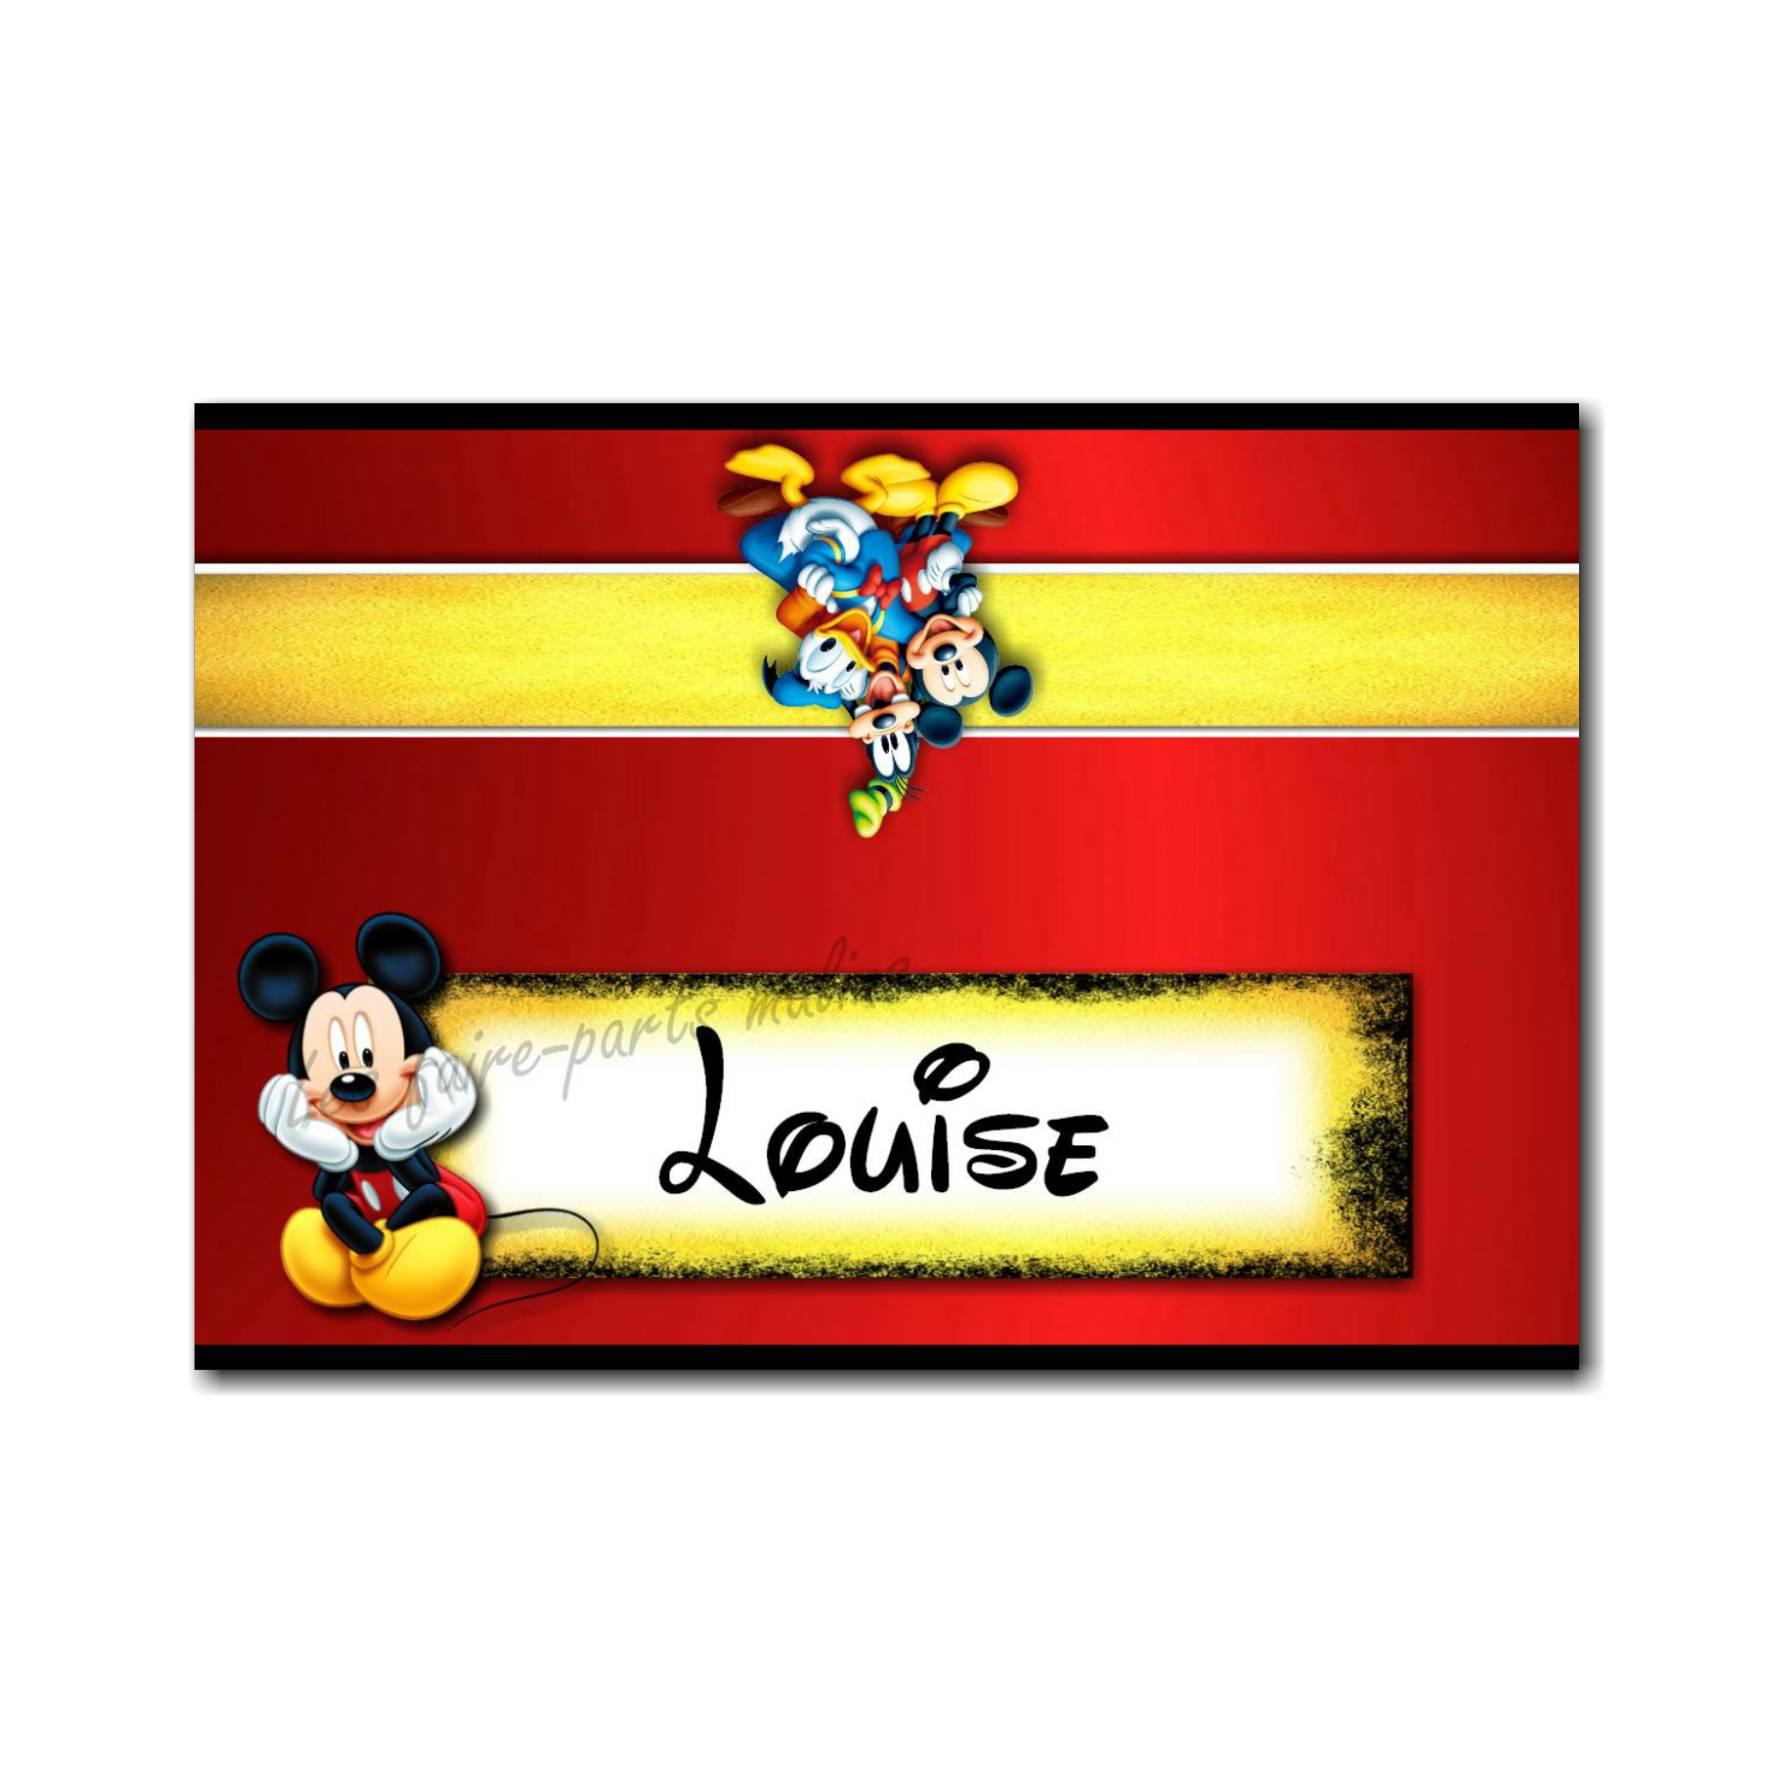 Marque-place rouge mickey mousse